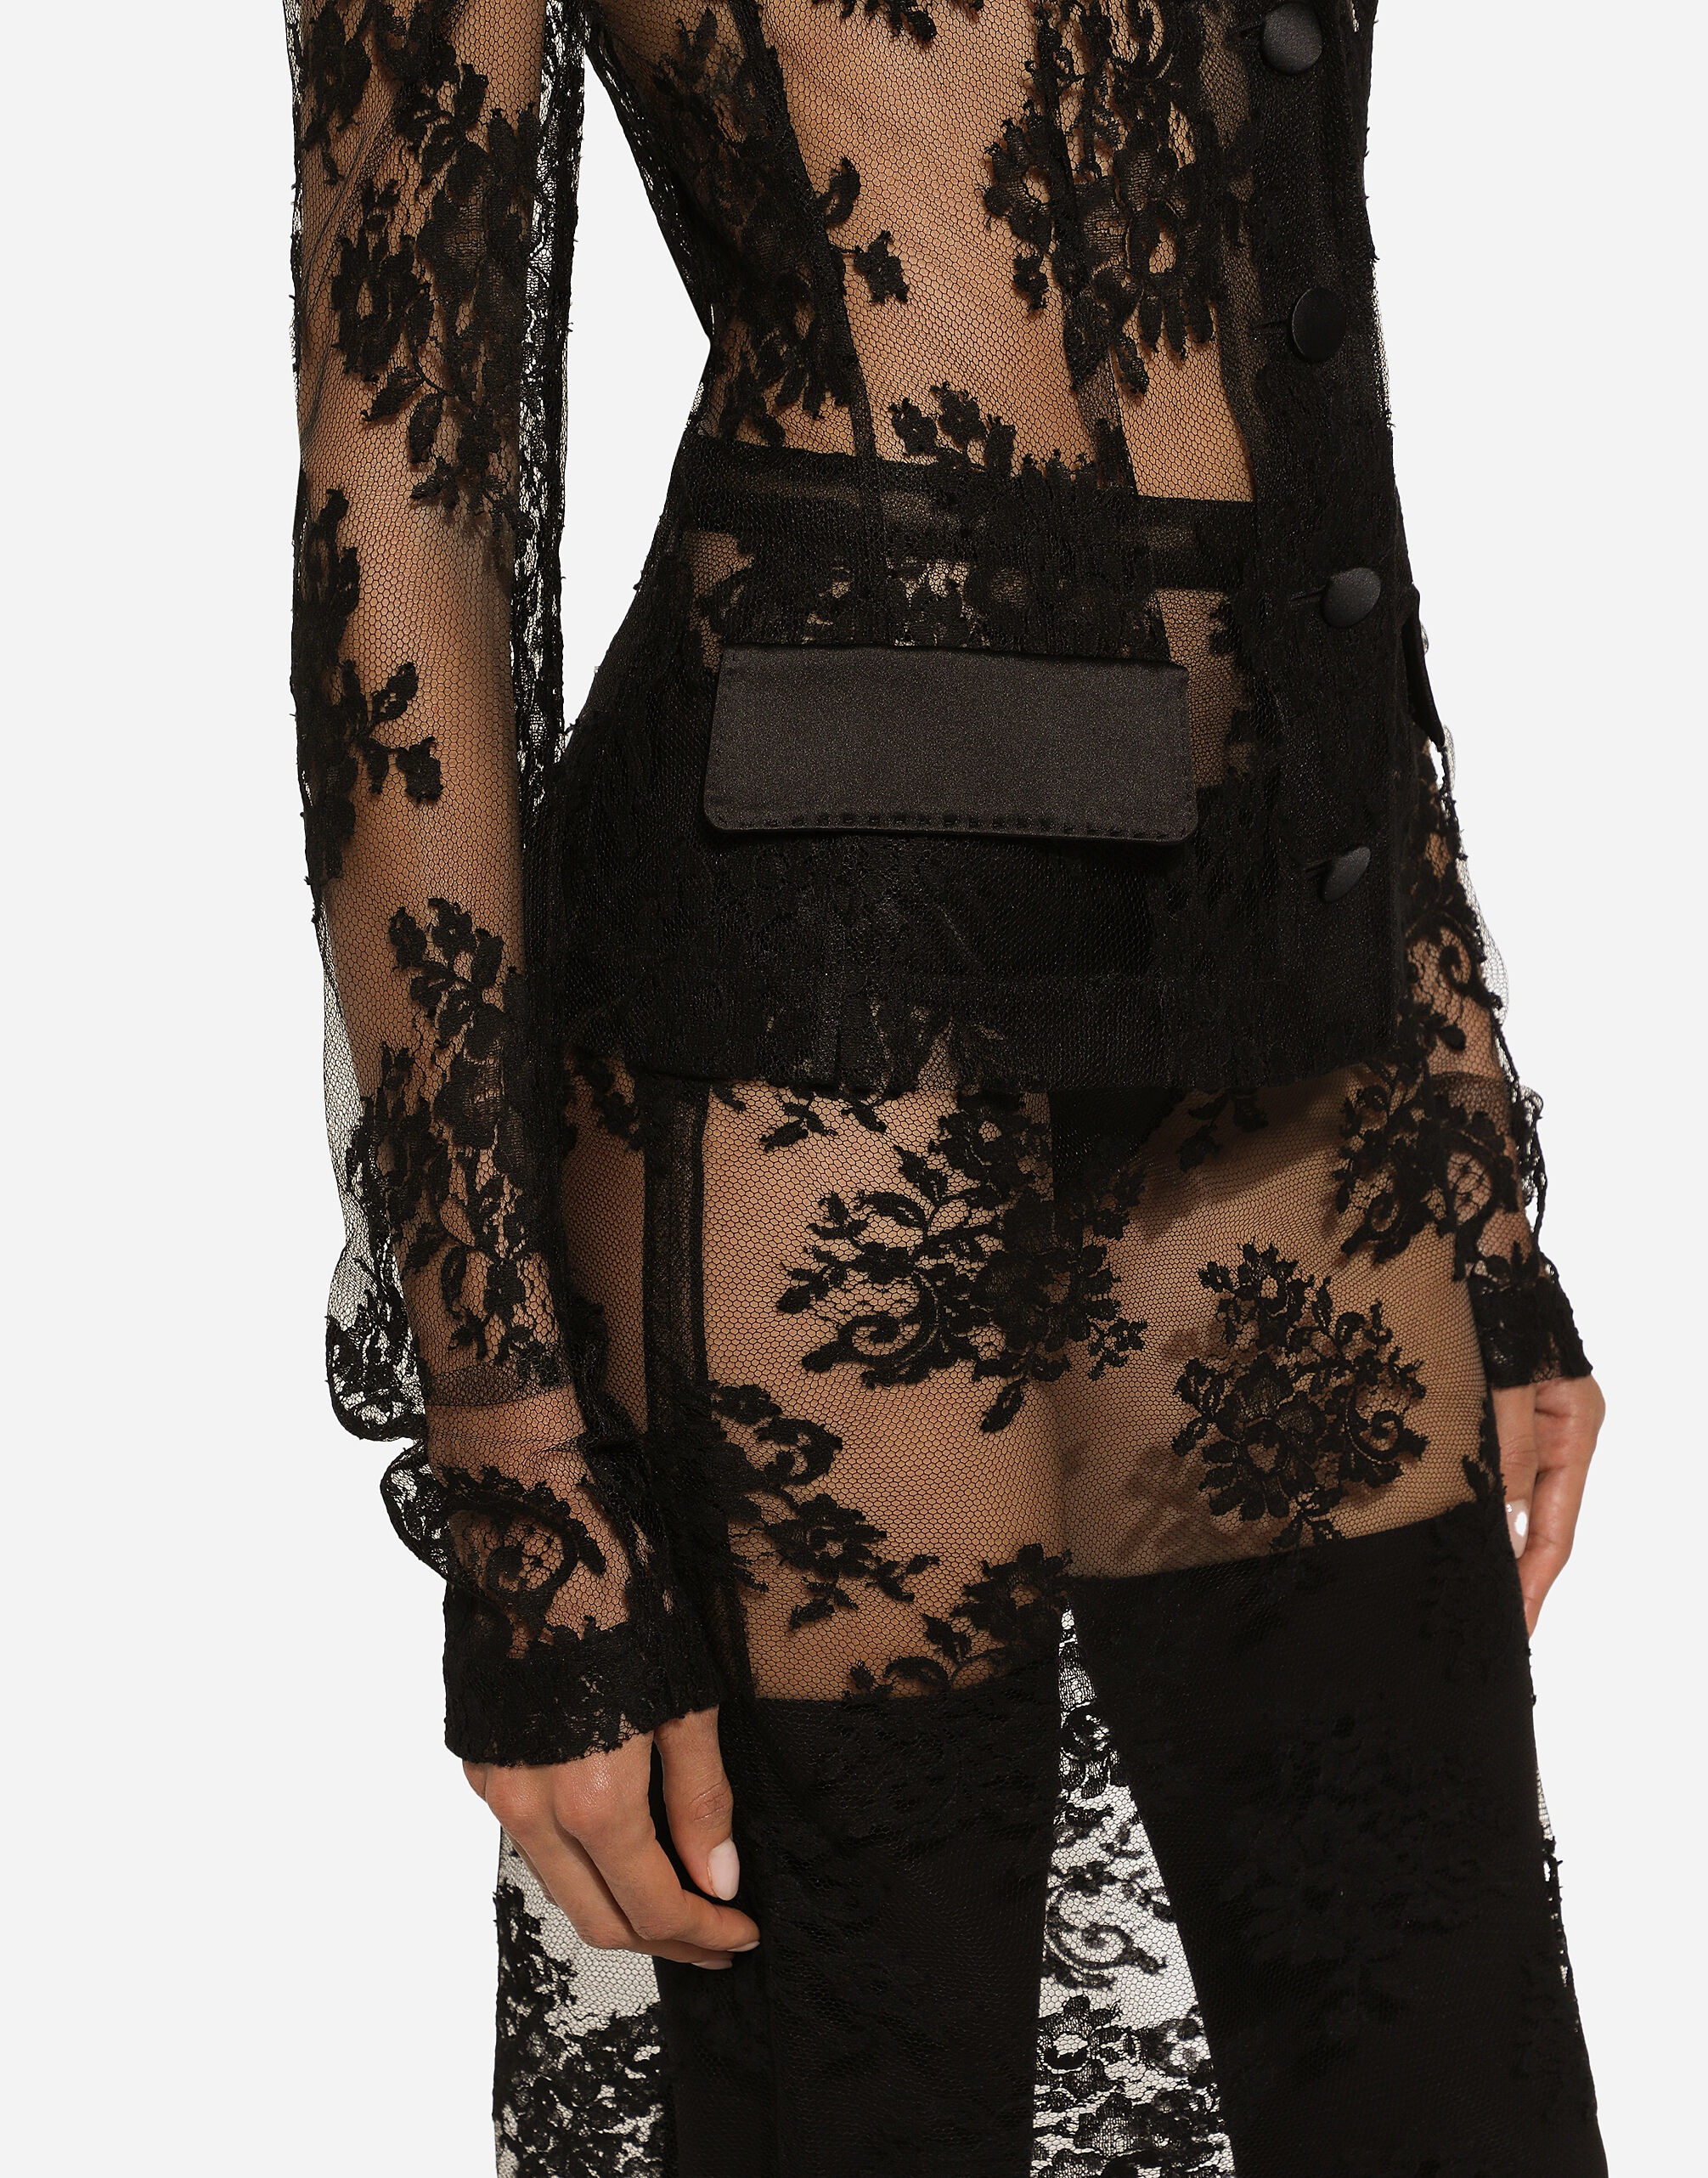 Floral lace jacket with satin details - 7